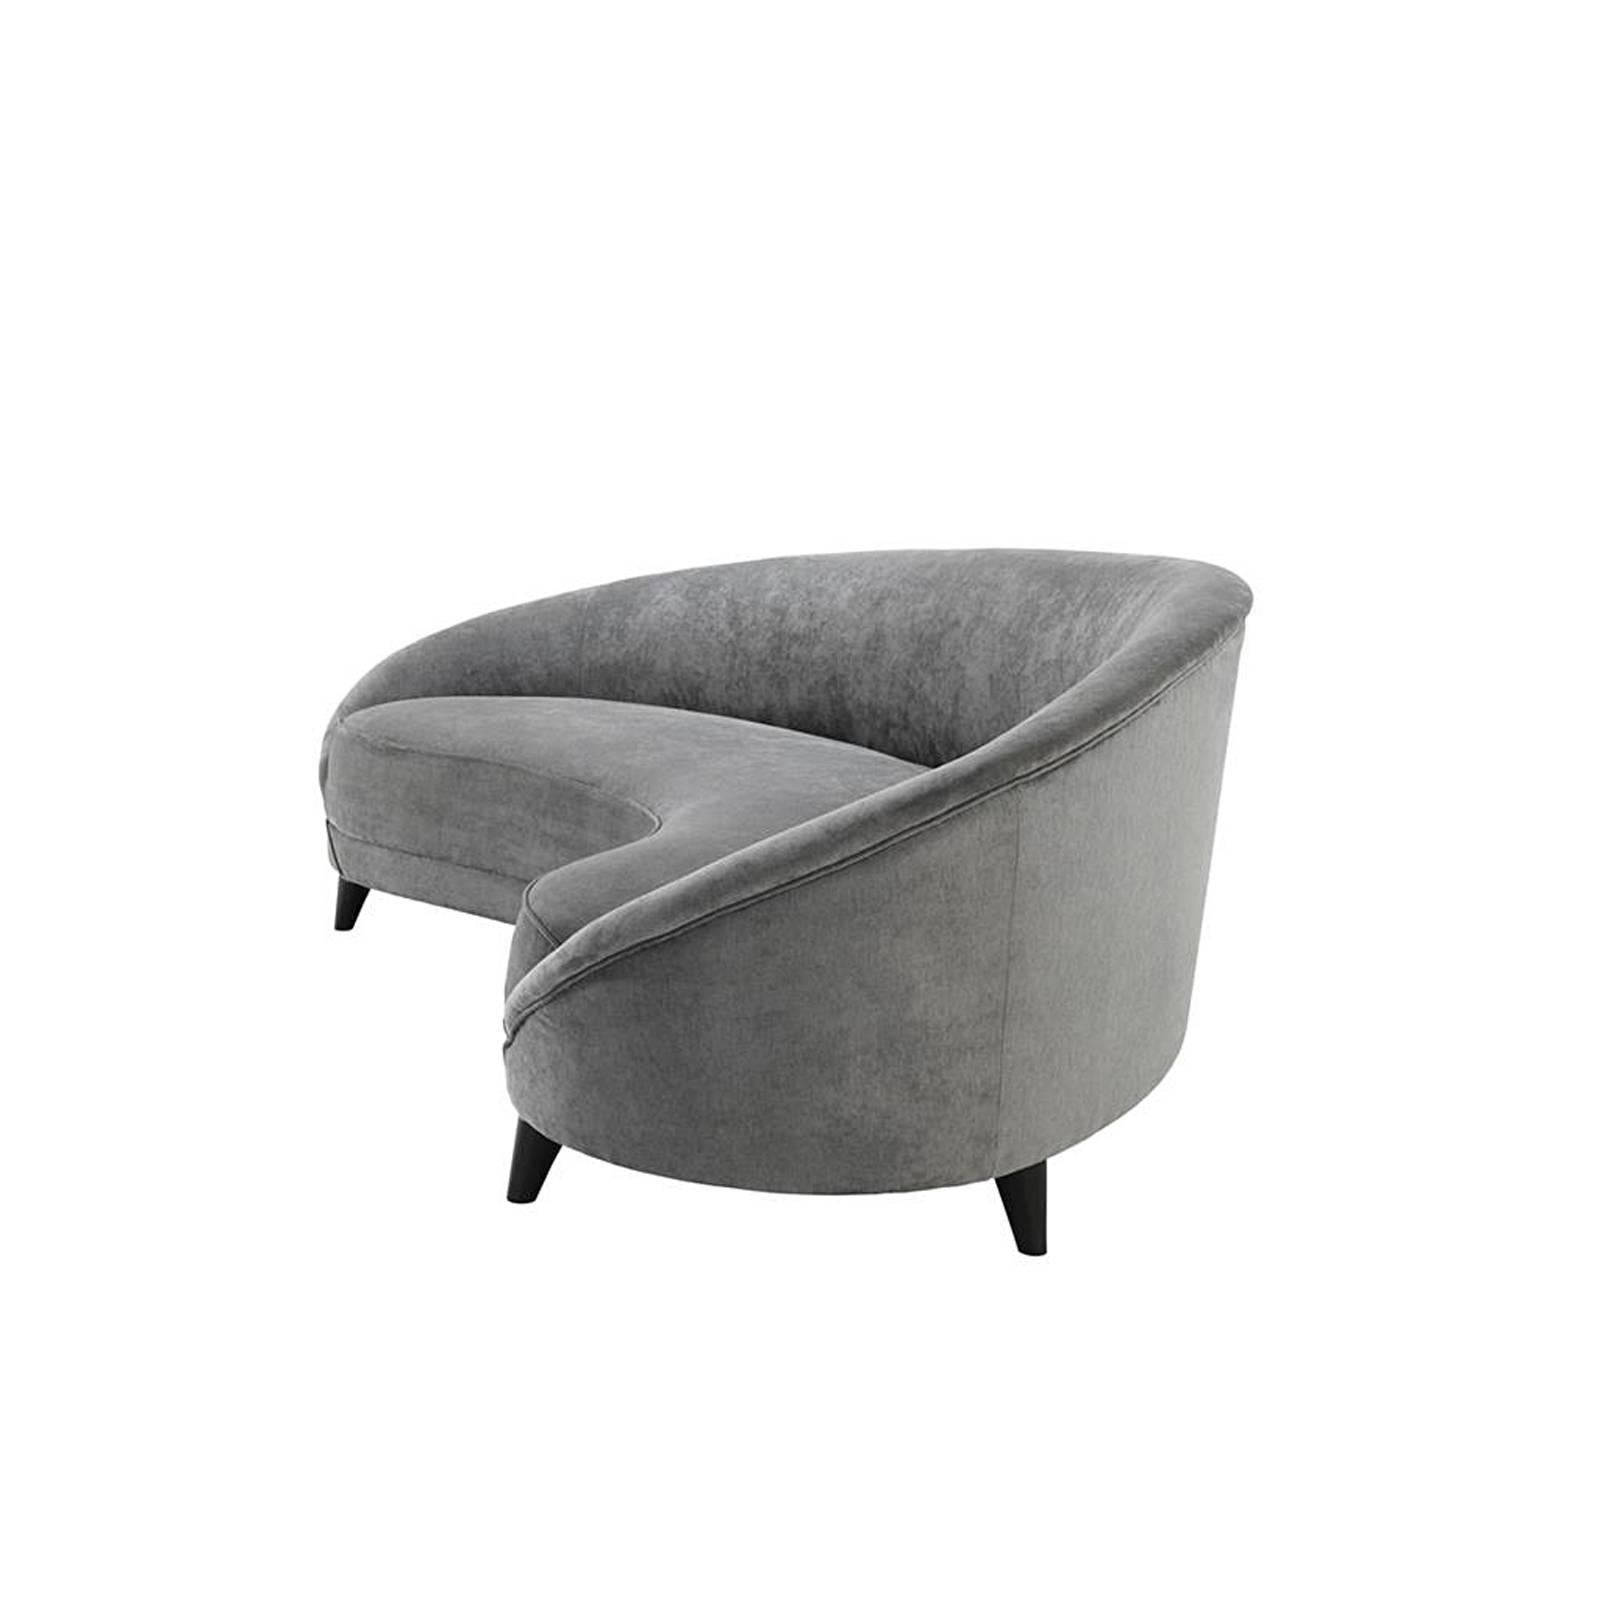 Sofa cocoon wood in grey velvet fabric
with black wood feet.
Also available in beige velvet fabric.
 